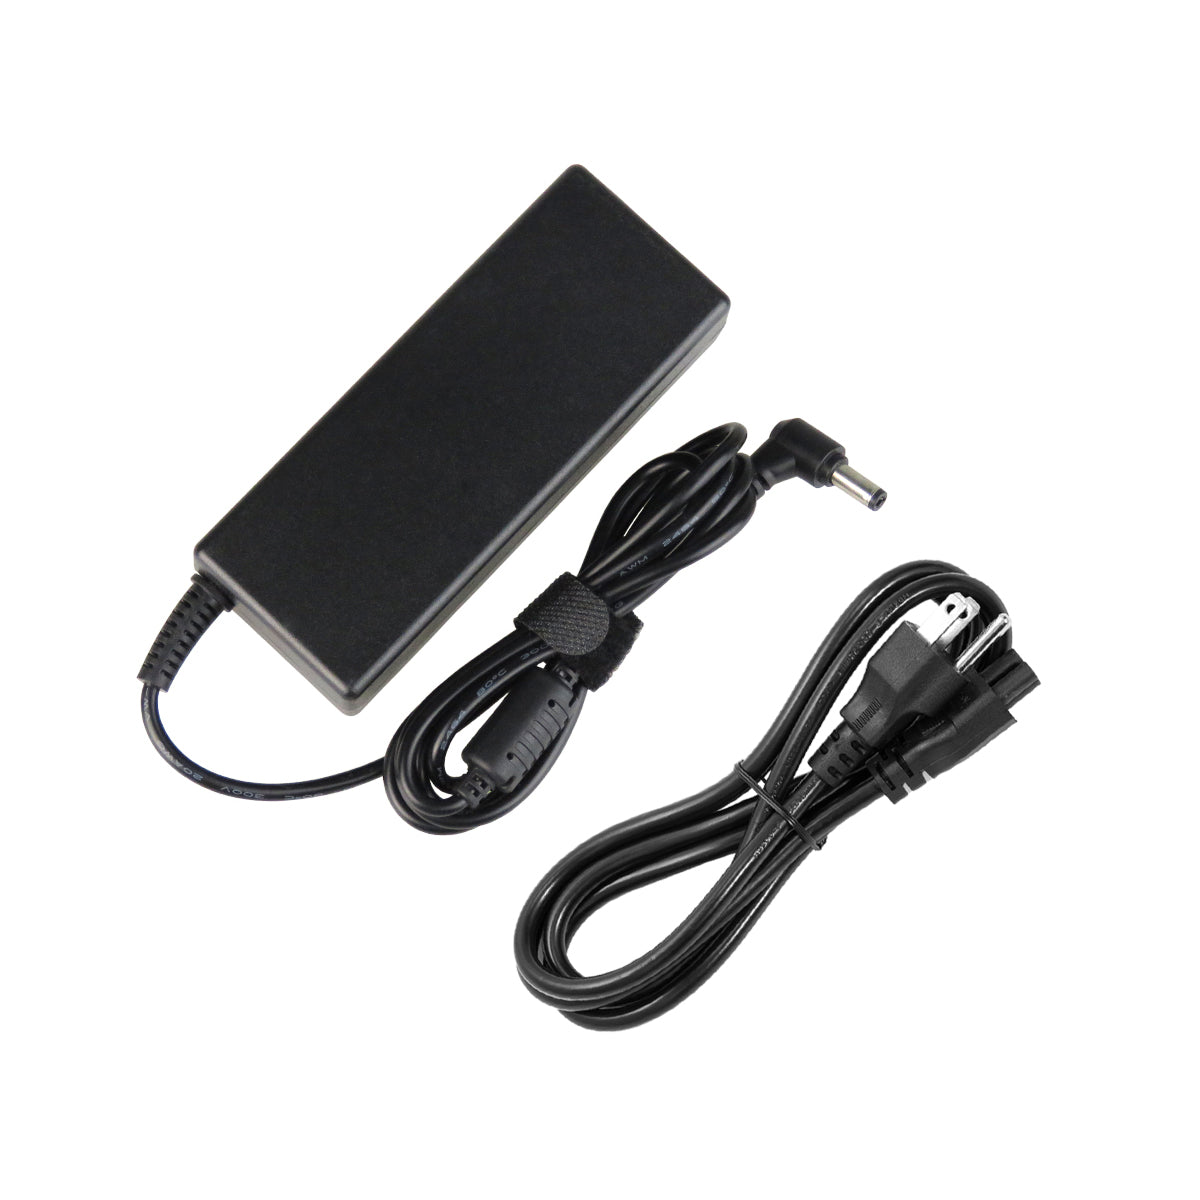 AC Adapter Charger for ASUS A8Ja Notebook.